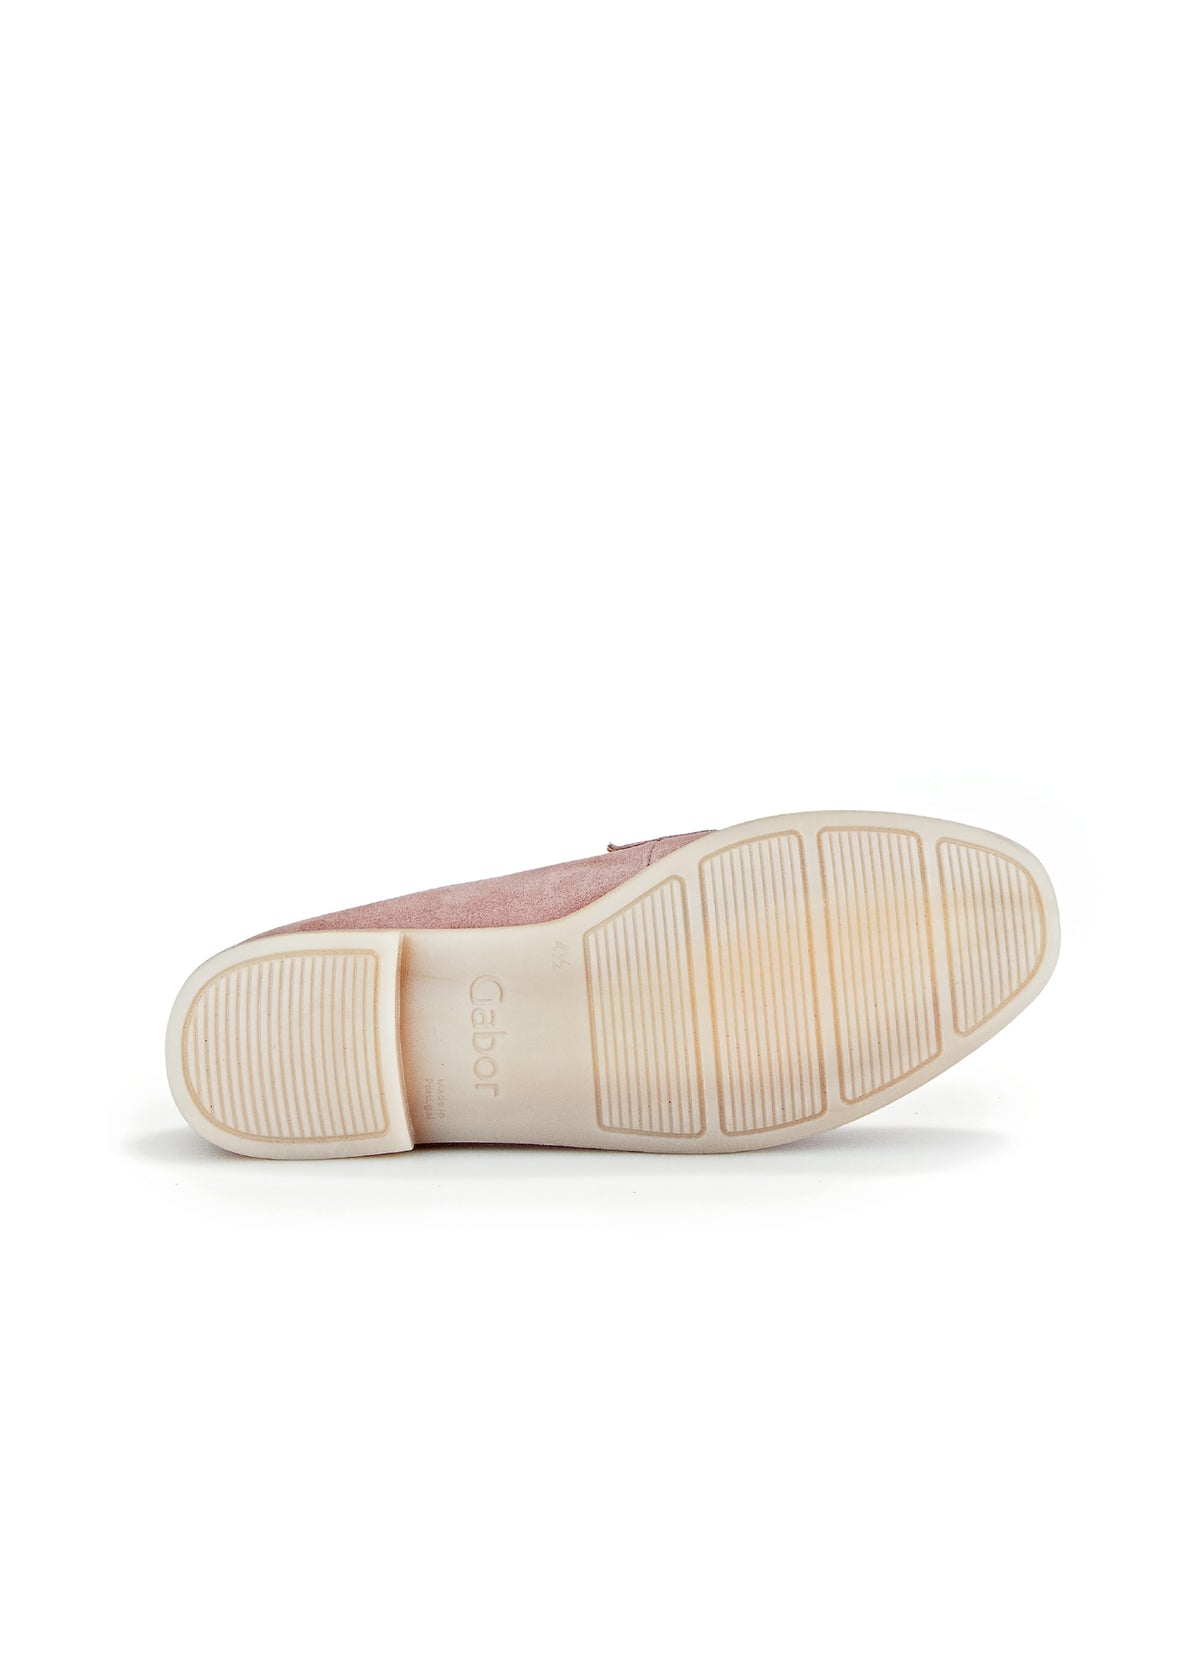 Loafers - light pink suede, leather loafer strap